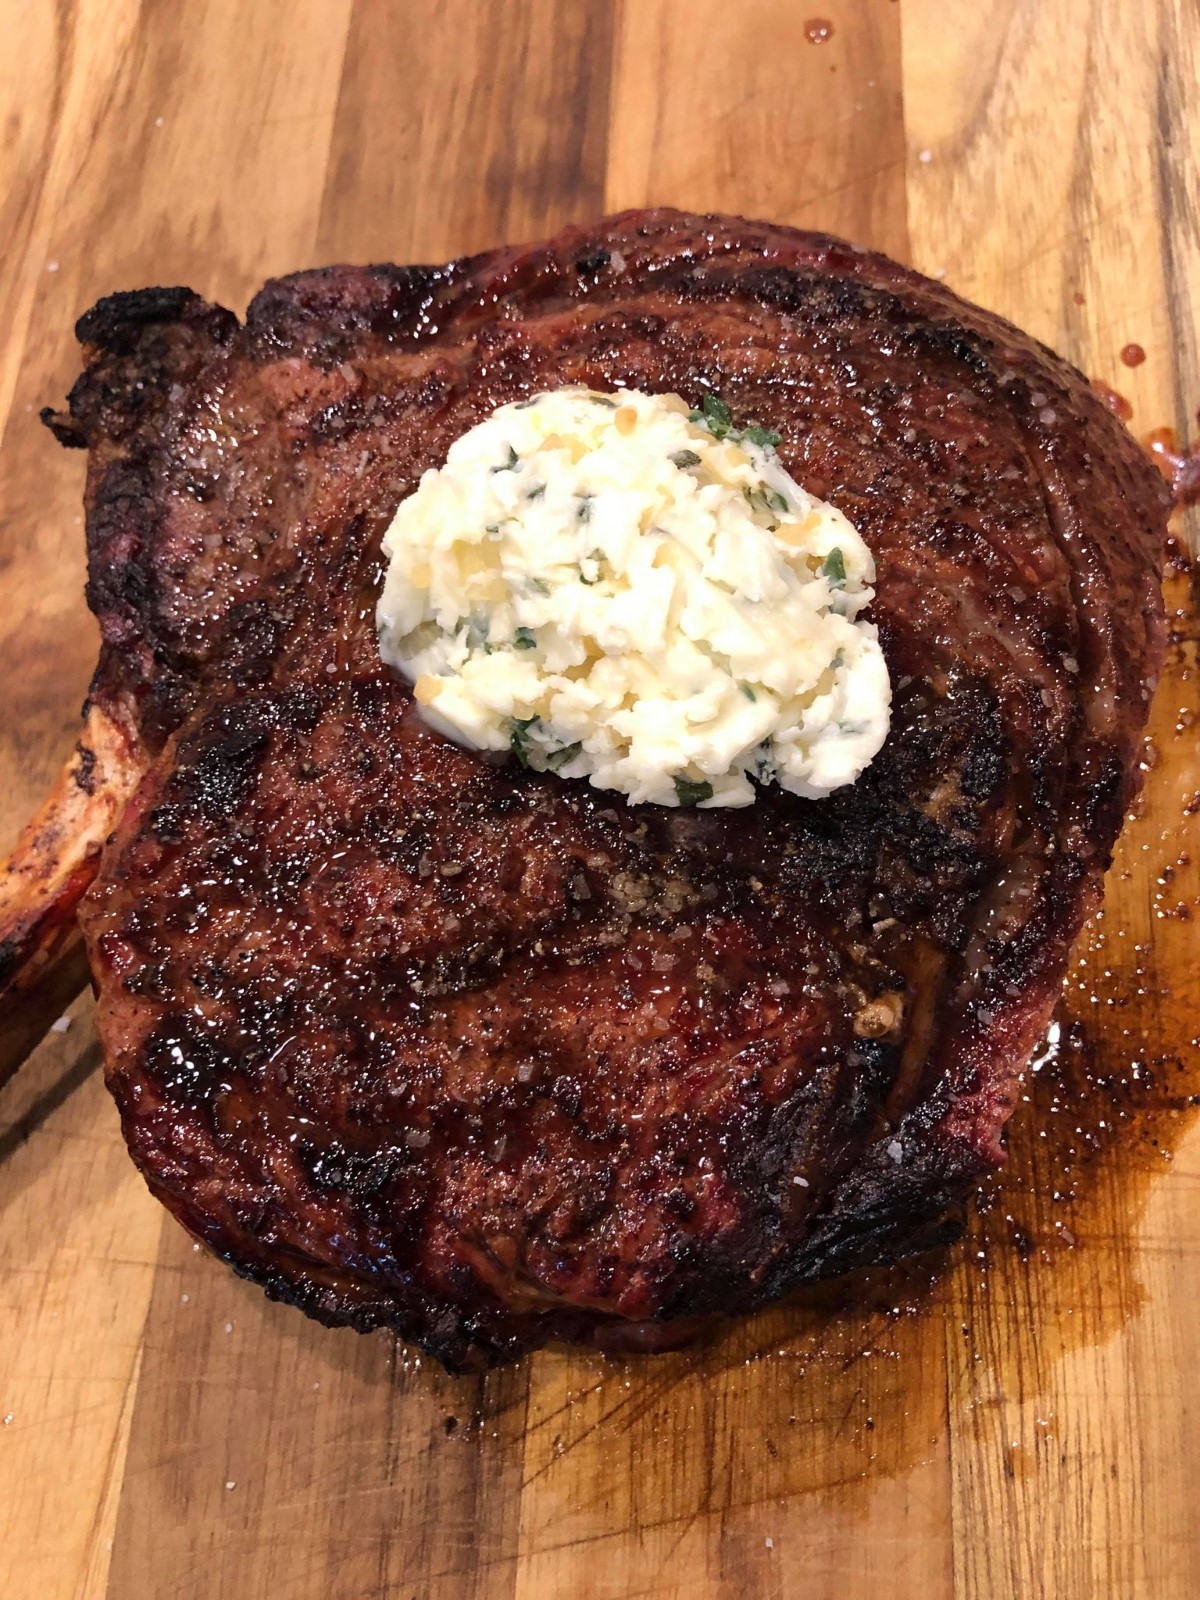 Grilled tomahawk steak resting on a wooden cutting board with a large dollop of garlic herb butter on top.